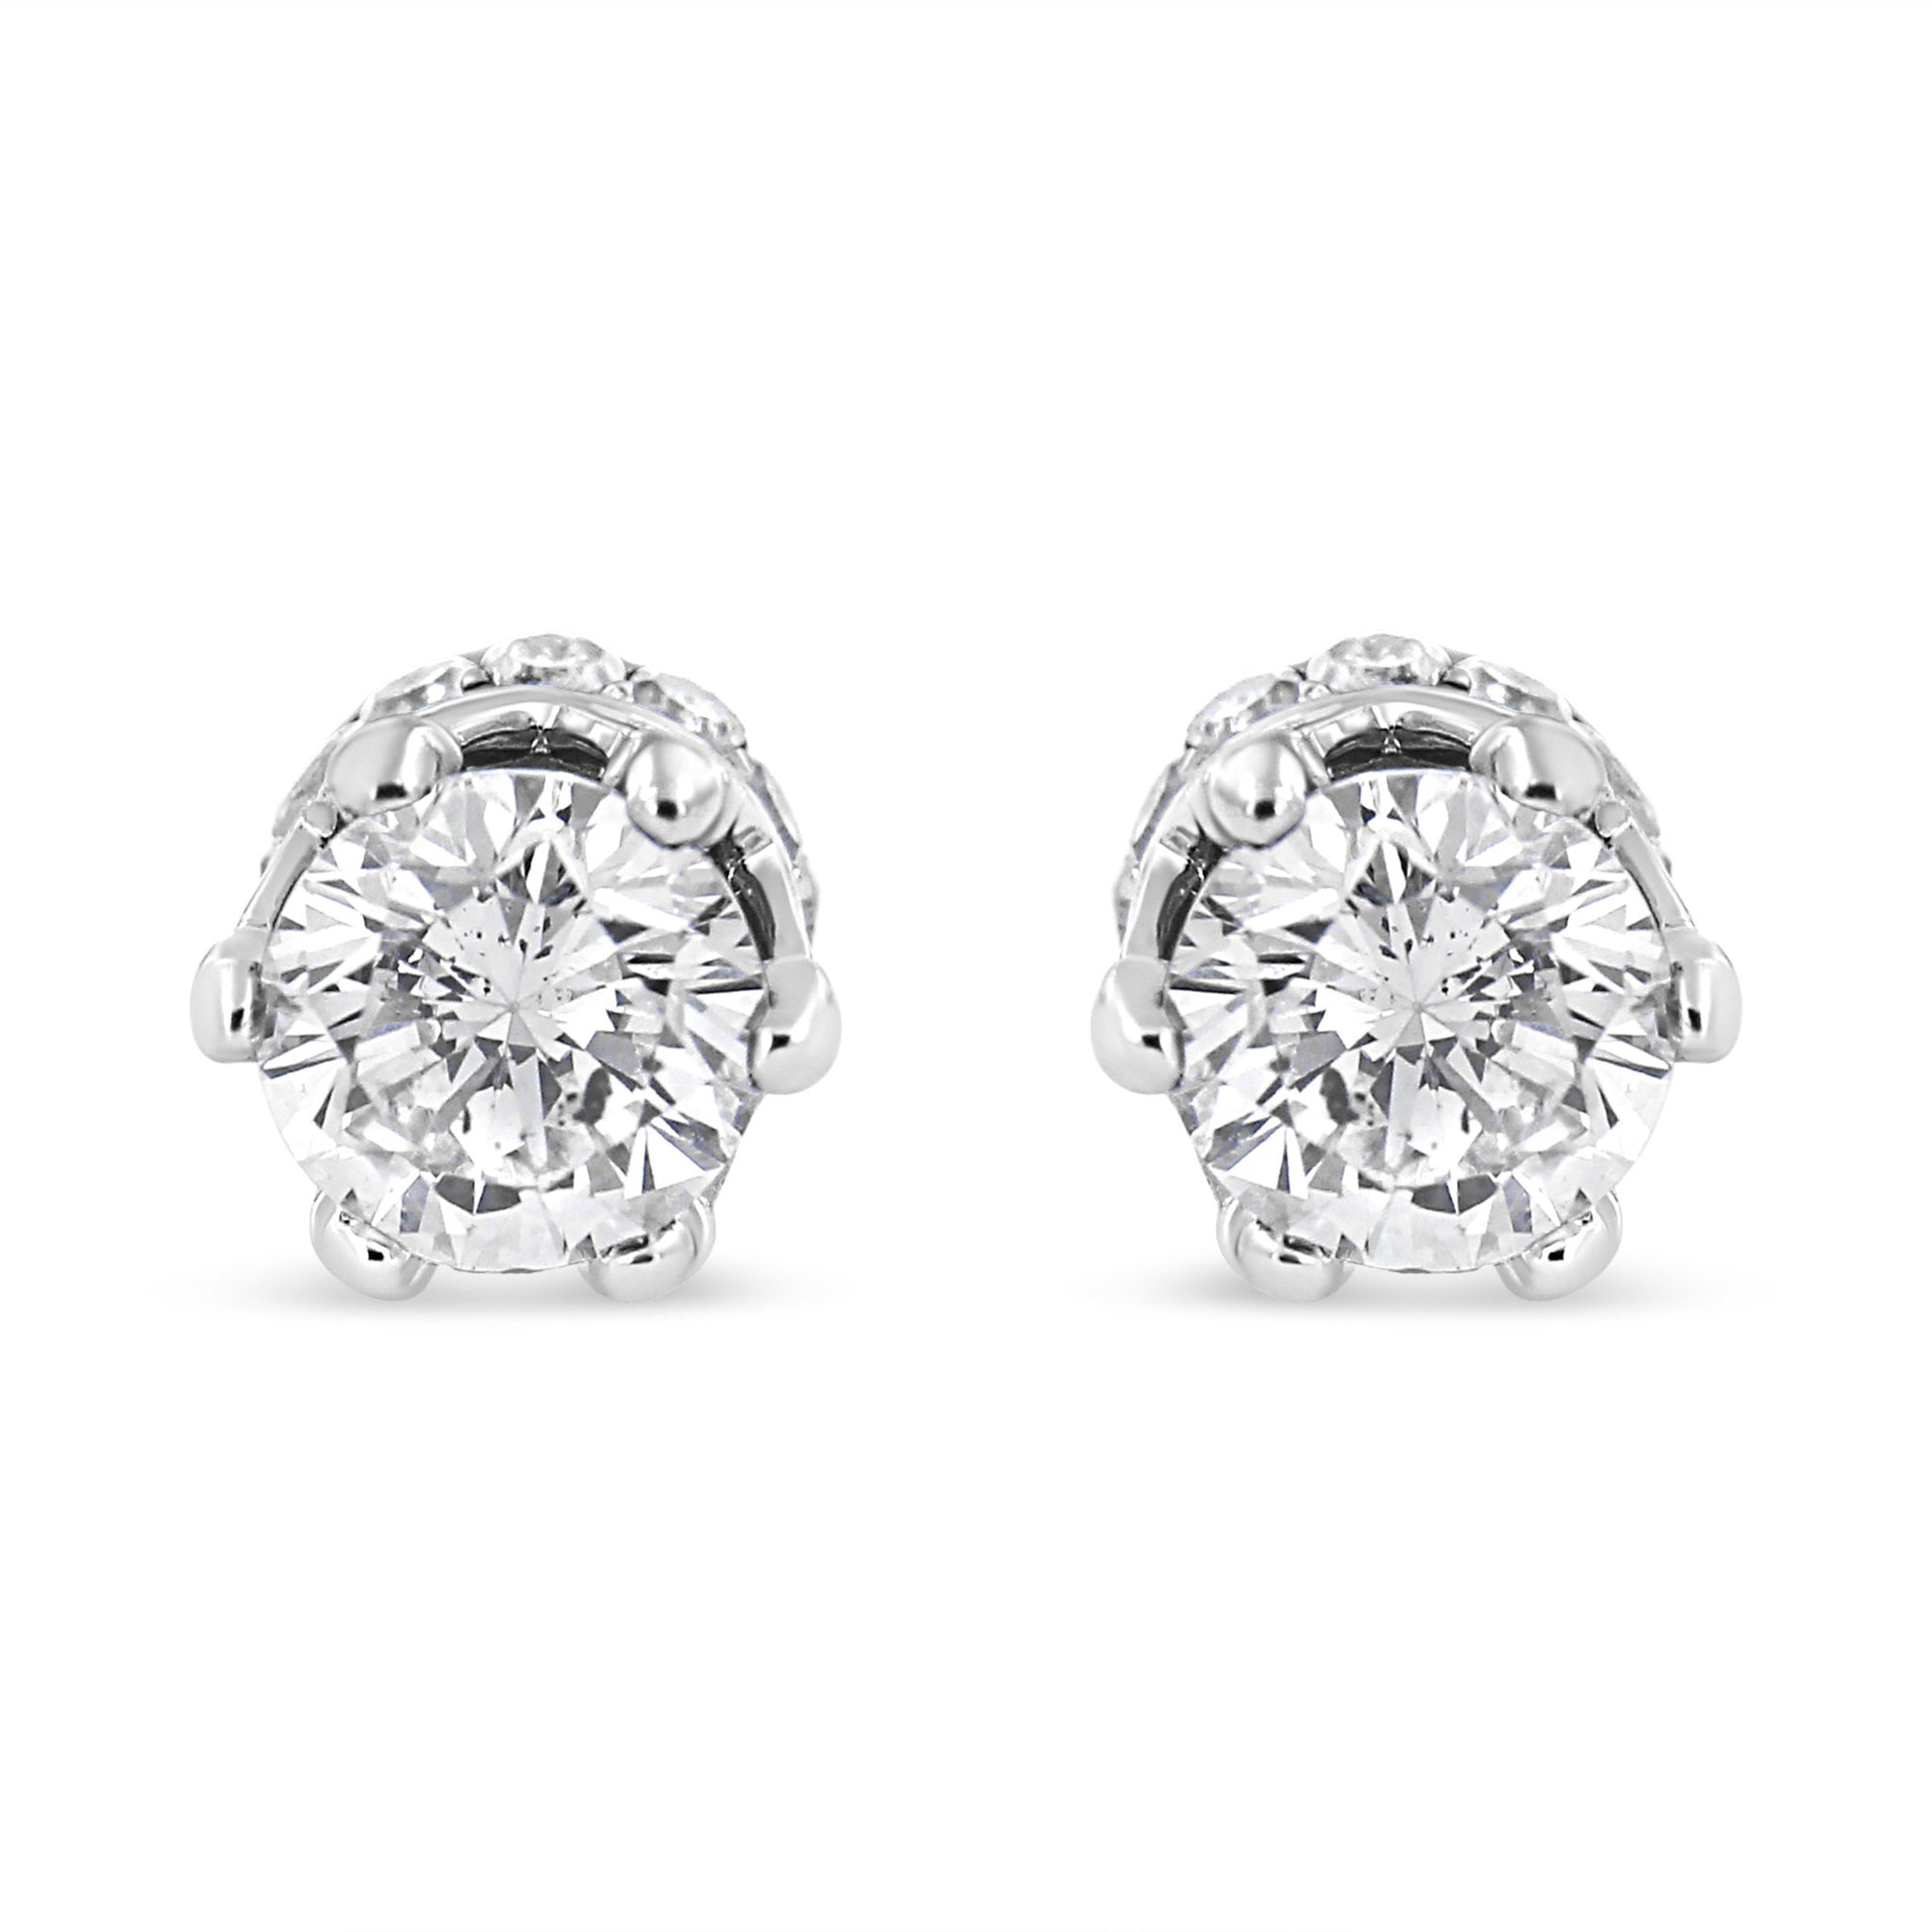 14K White Gold 2.0 Cttw Round Cut Prong-Set Diamond Crown Stud Earring (I-J Color, I1-I2 Clarity) - LinkagejewelrydesignLinkagejewelrydesign